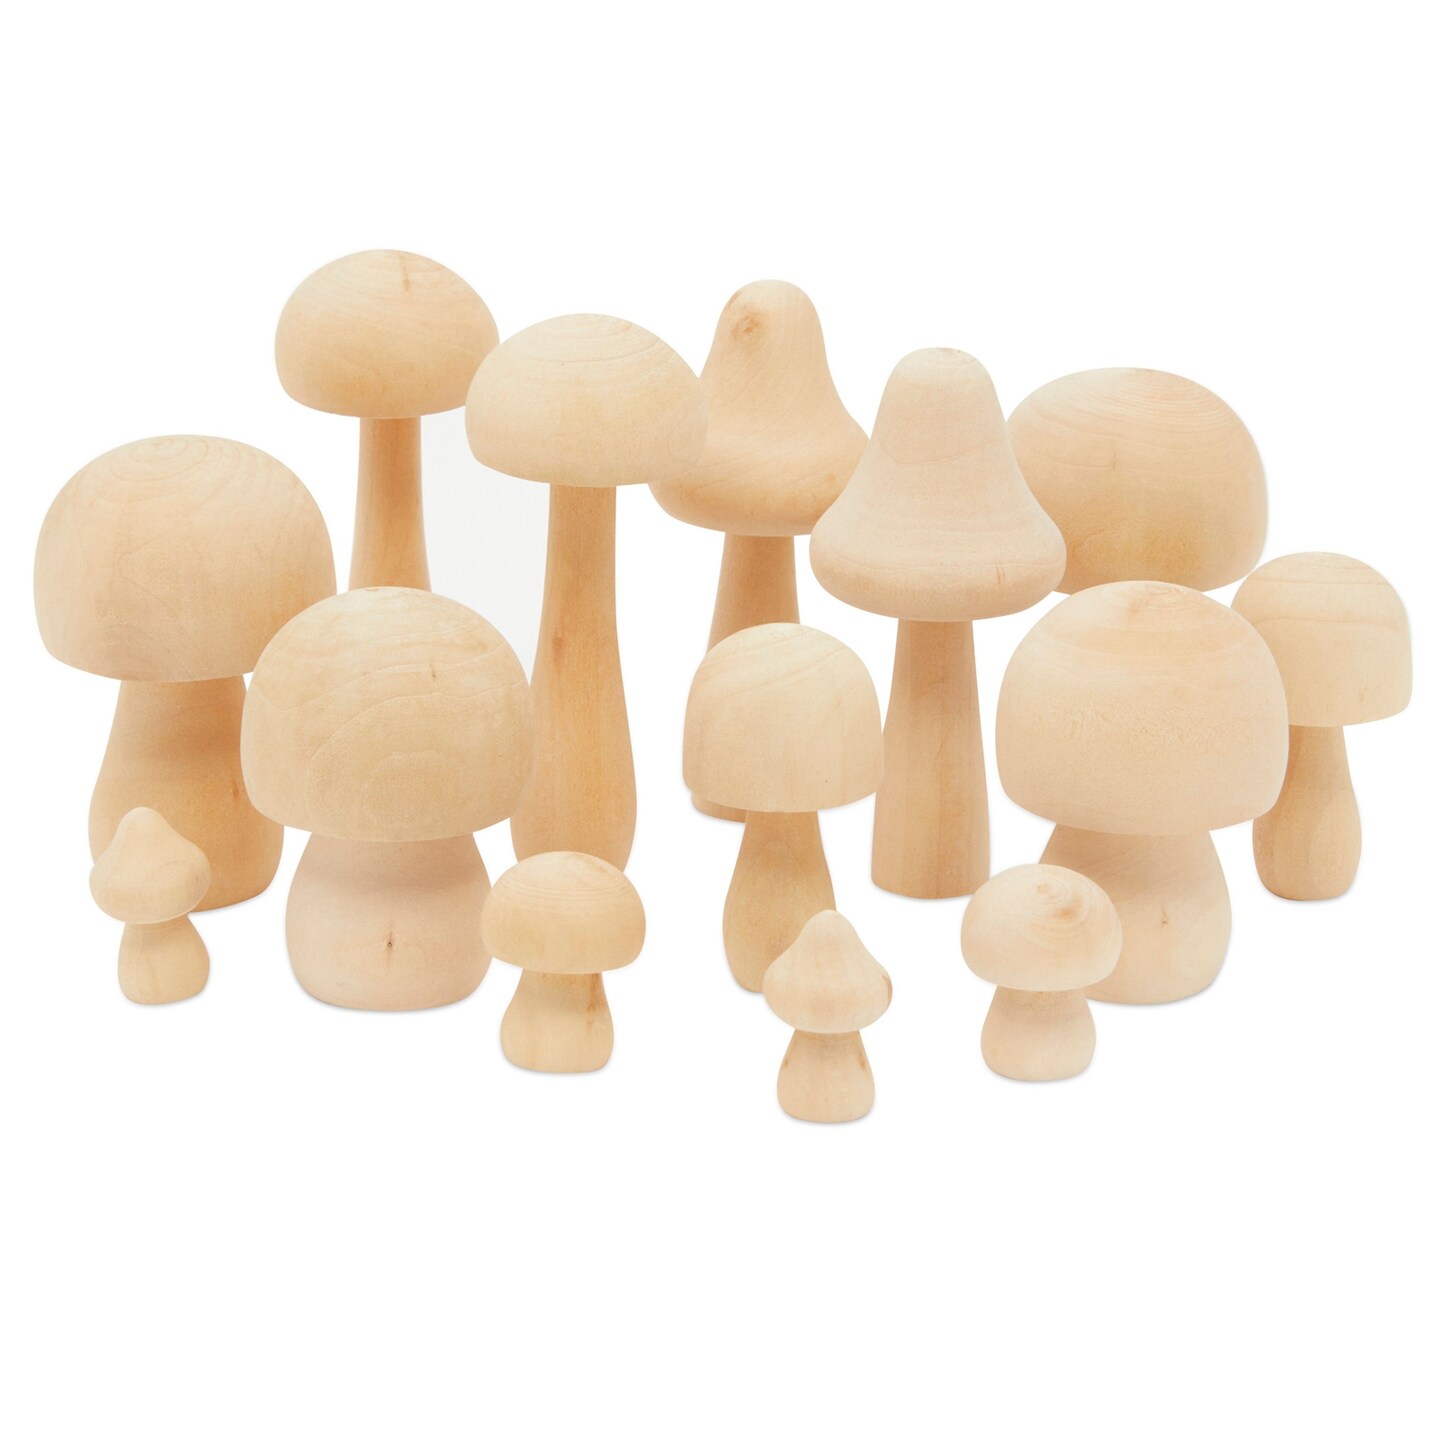 Mini Wooden Mushrooms for Home Decor, Unfinished Wood Peg Dolls for Crafts  (7 Sizes, 14 Pieces)